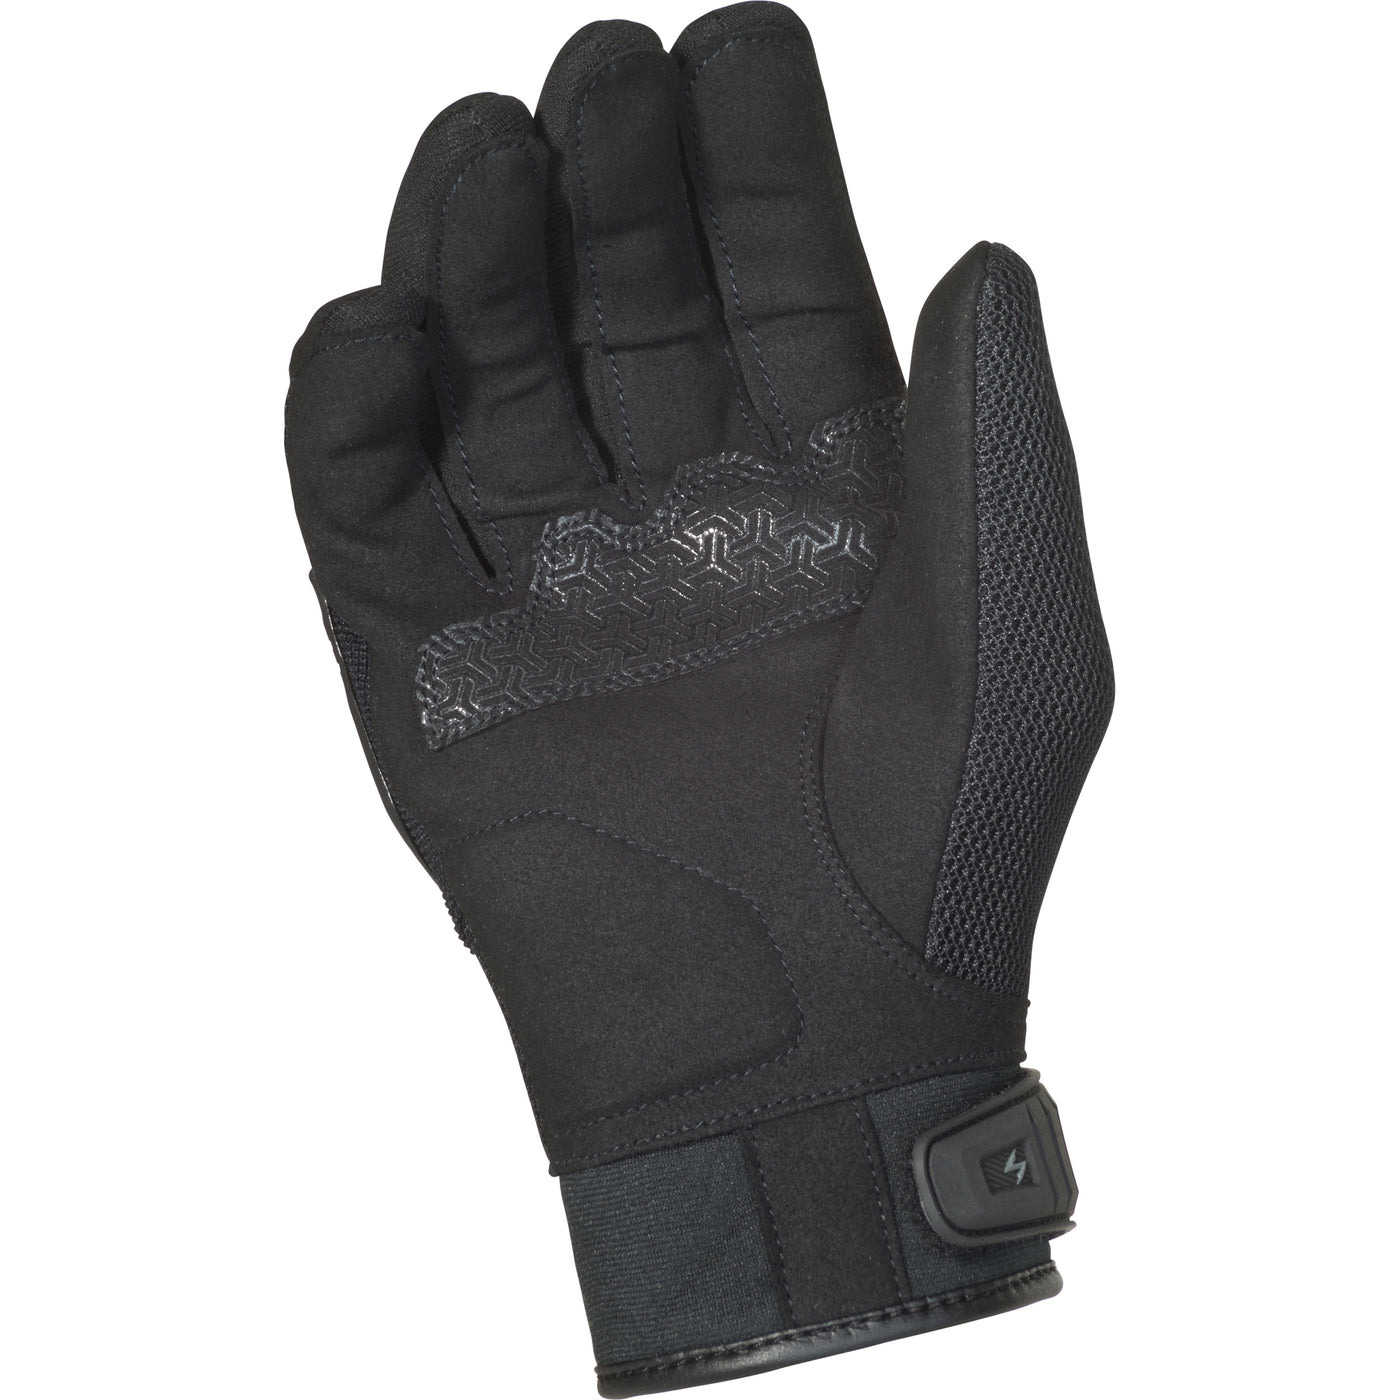 SCORPION EXO Covert Tactical Gloves